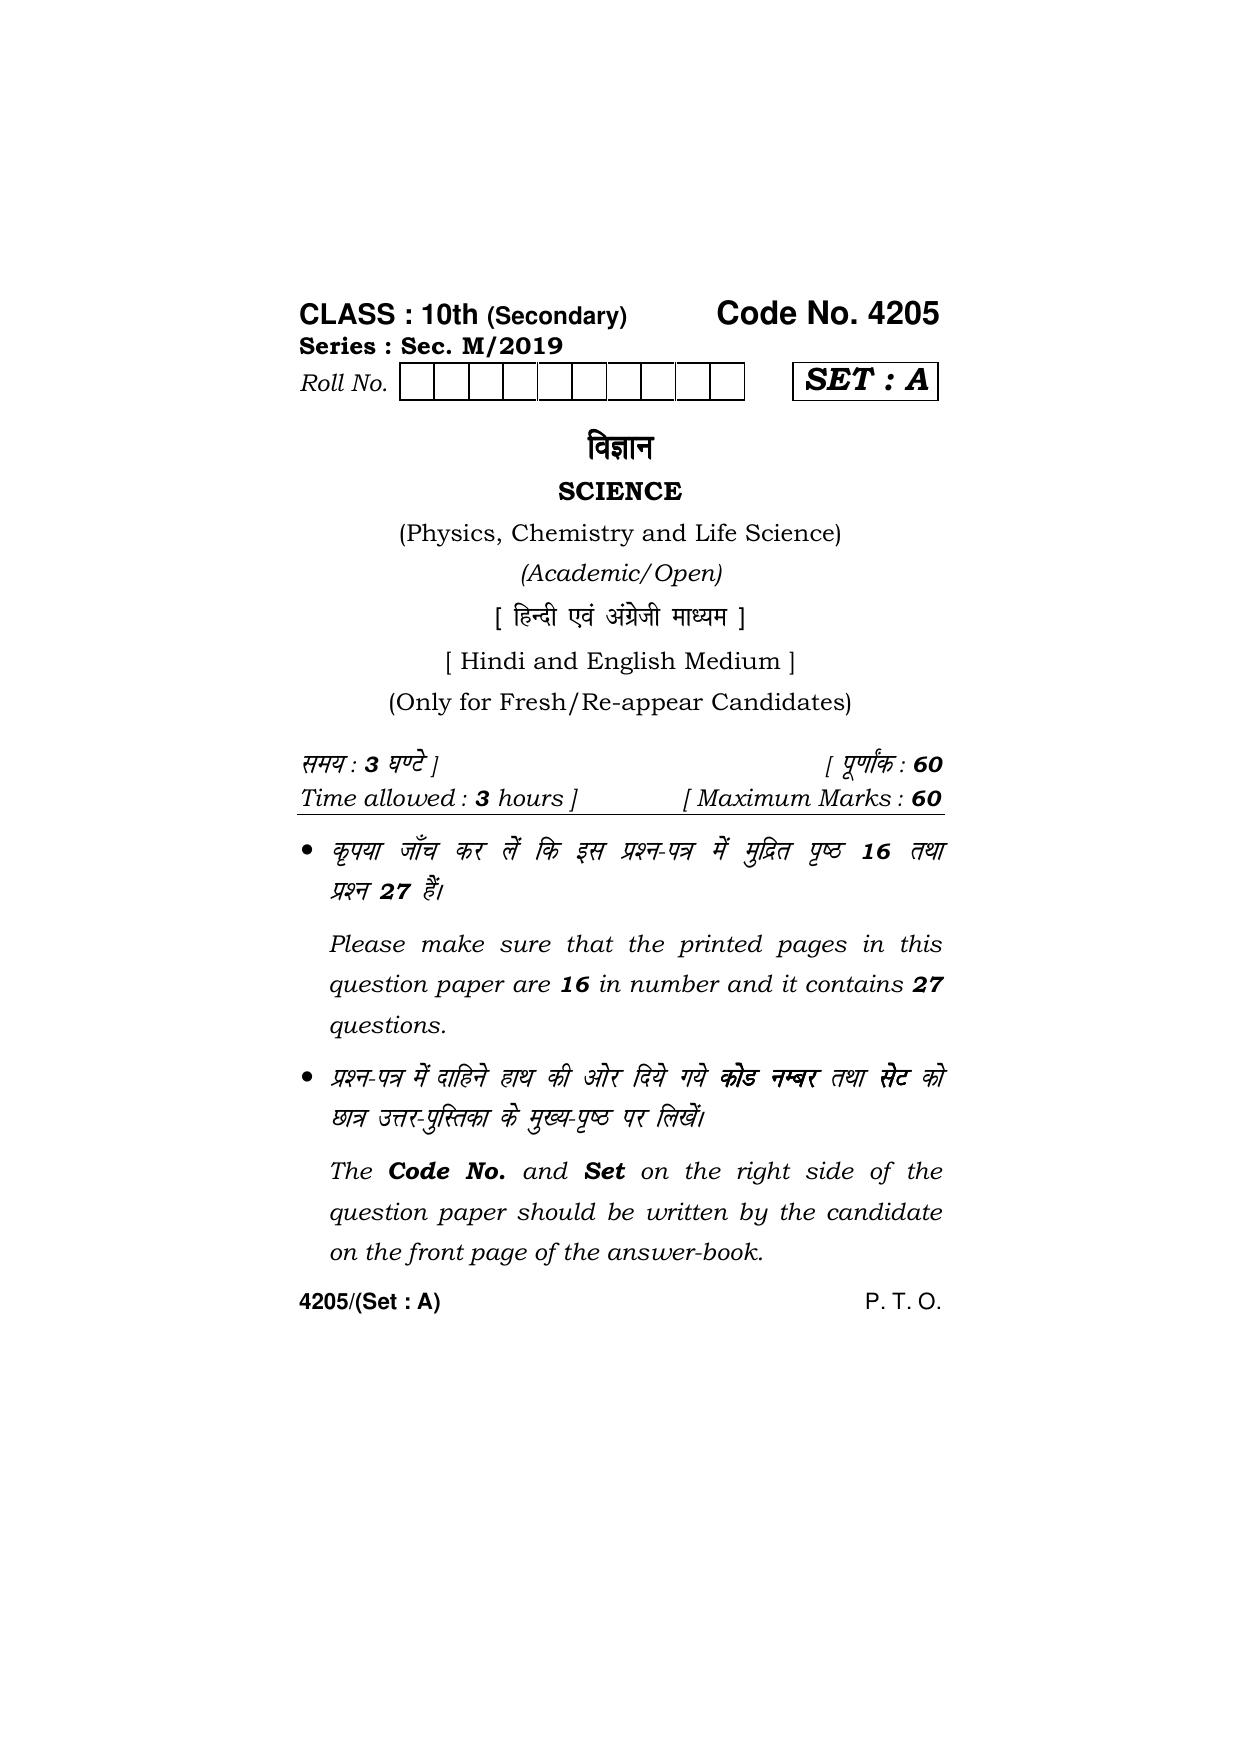 Haryana Board HBSE Class 10 Science (All Set) 2019 Question Paper - Page 1